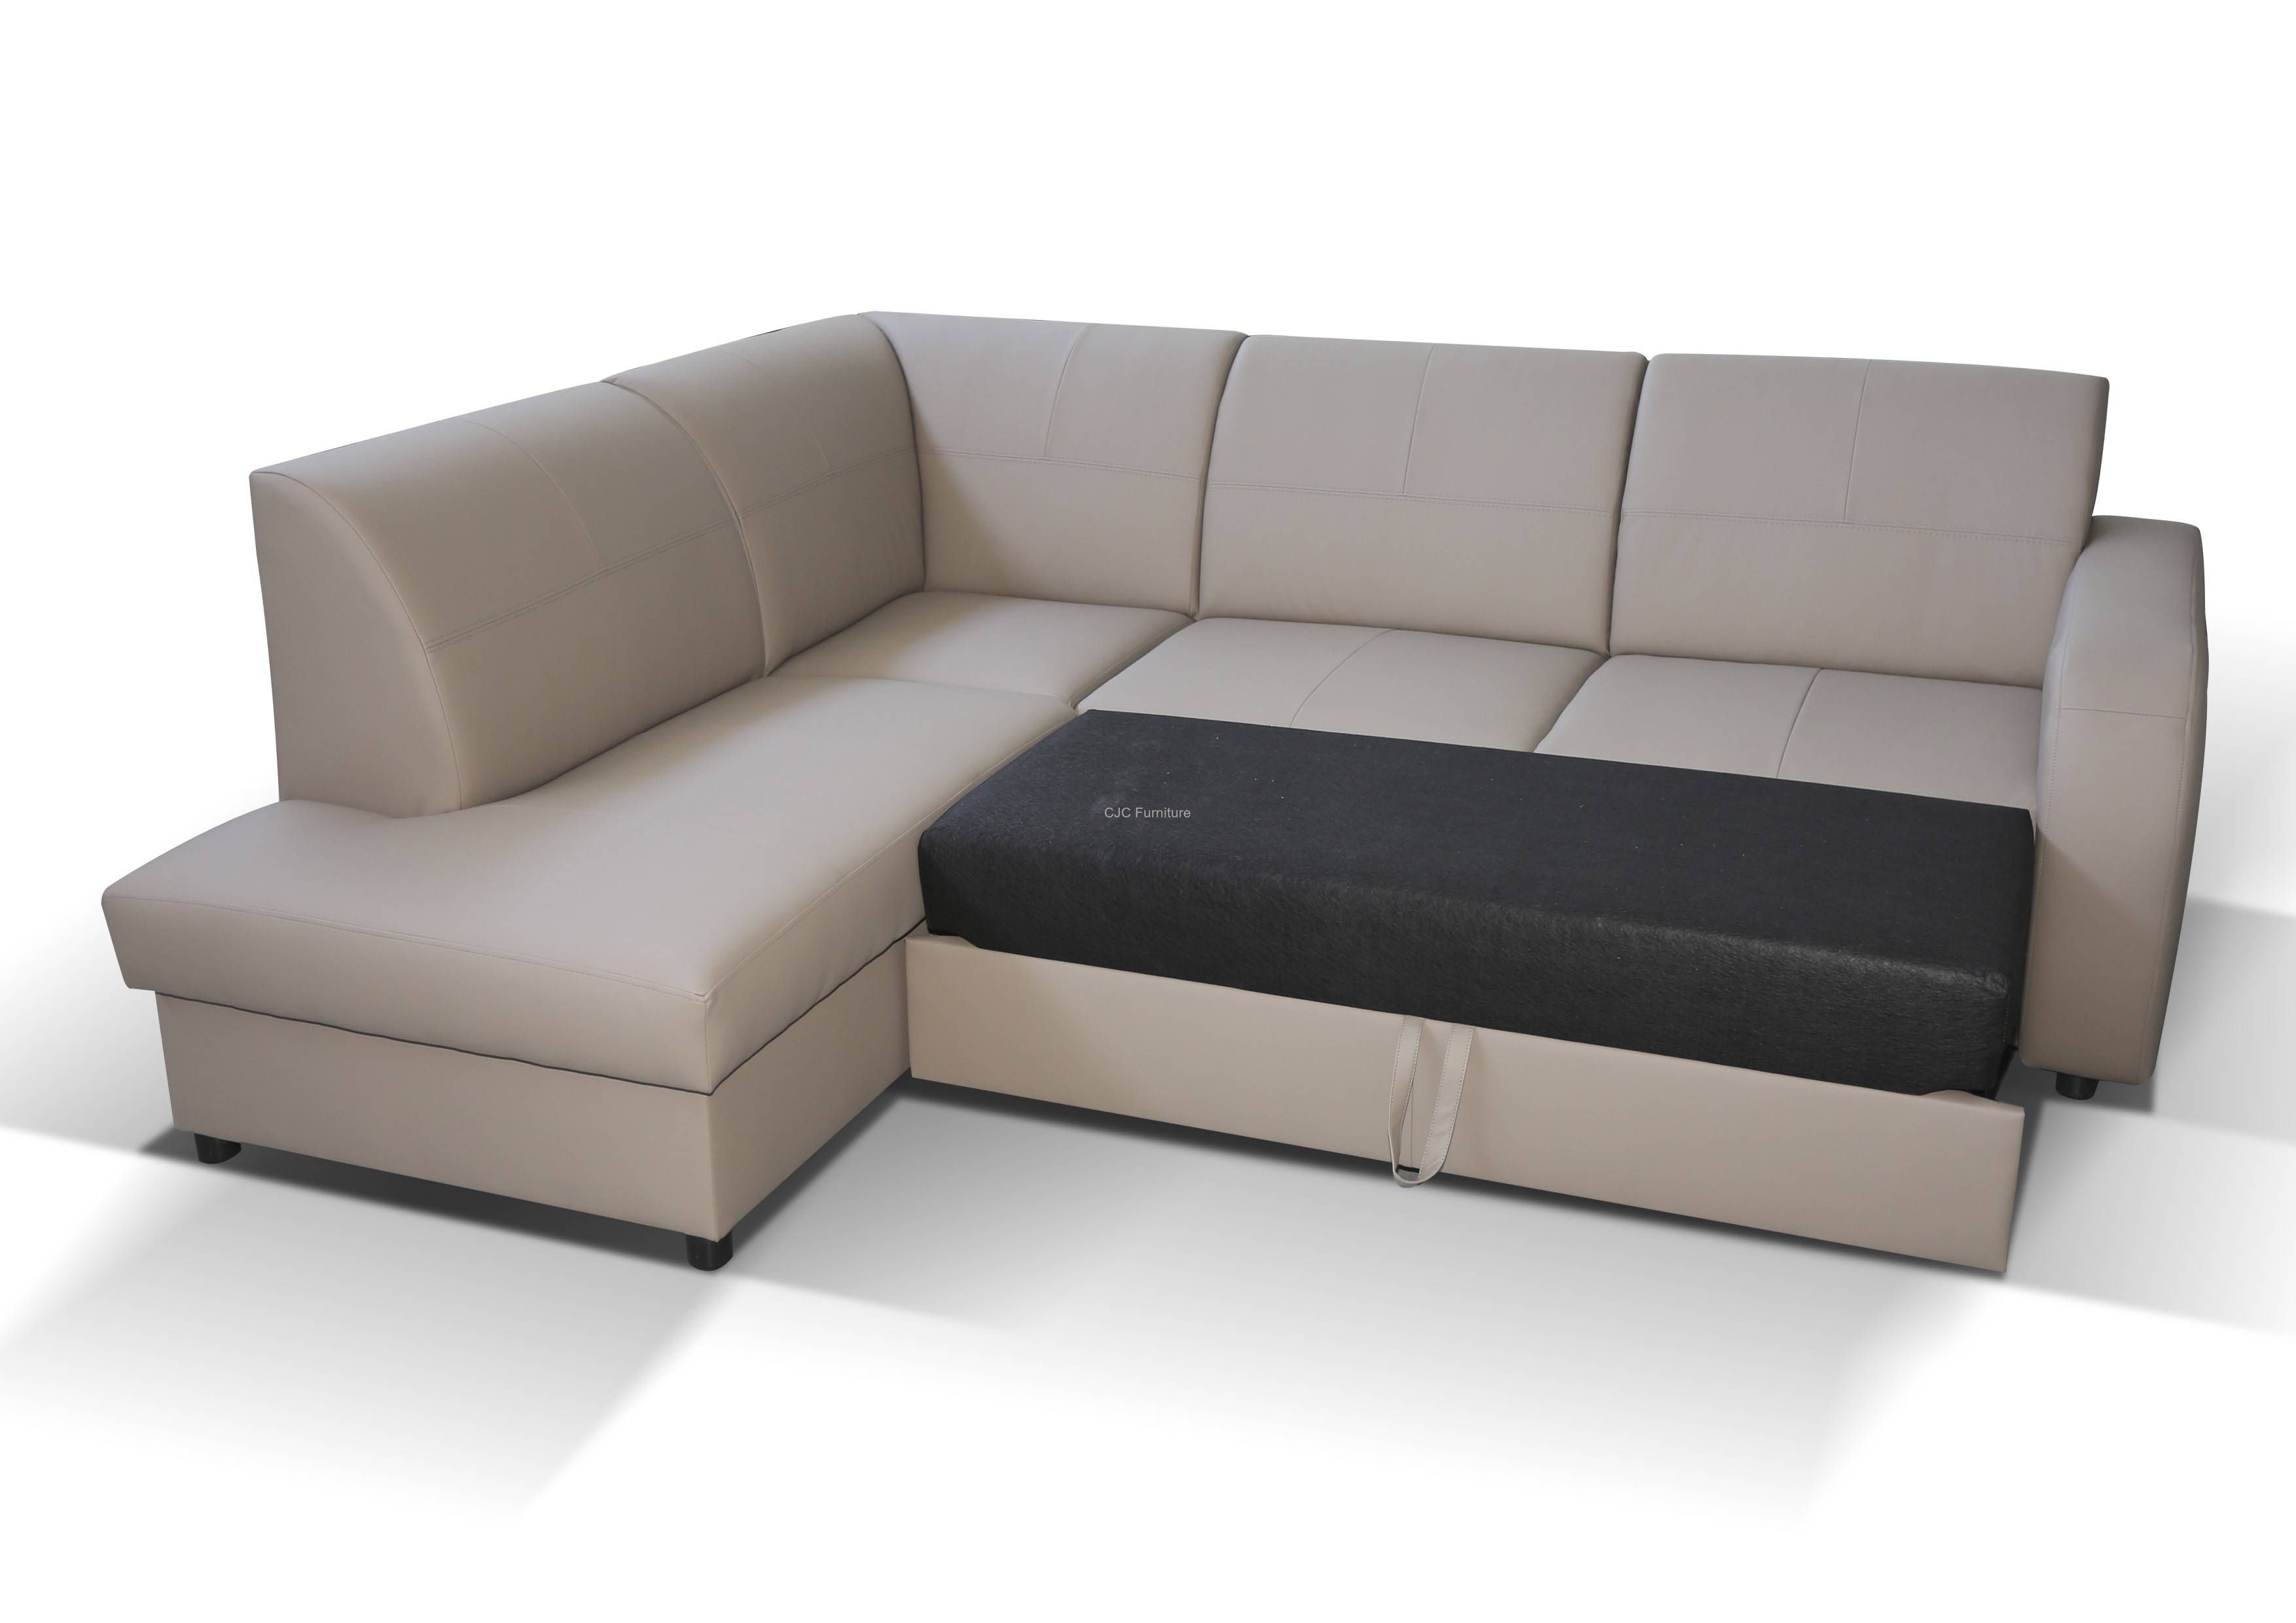 Sofas Center : Buy The Softline Cord Sofa At Nest Co Uk Vision Pertaining To Corner Sofa Bed Sale (View 9 of 30)